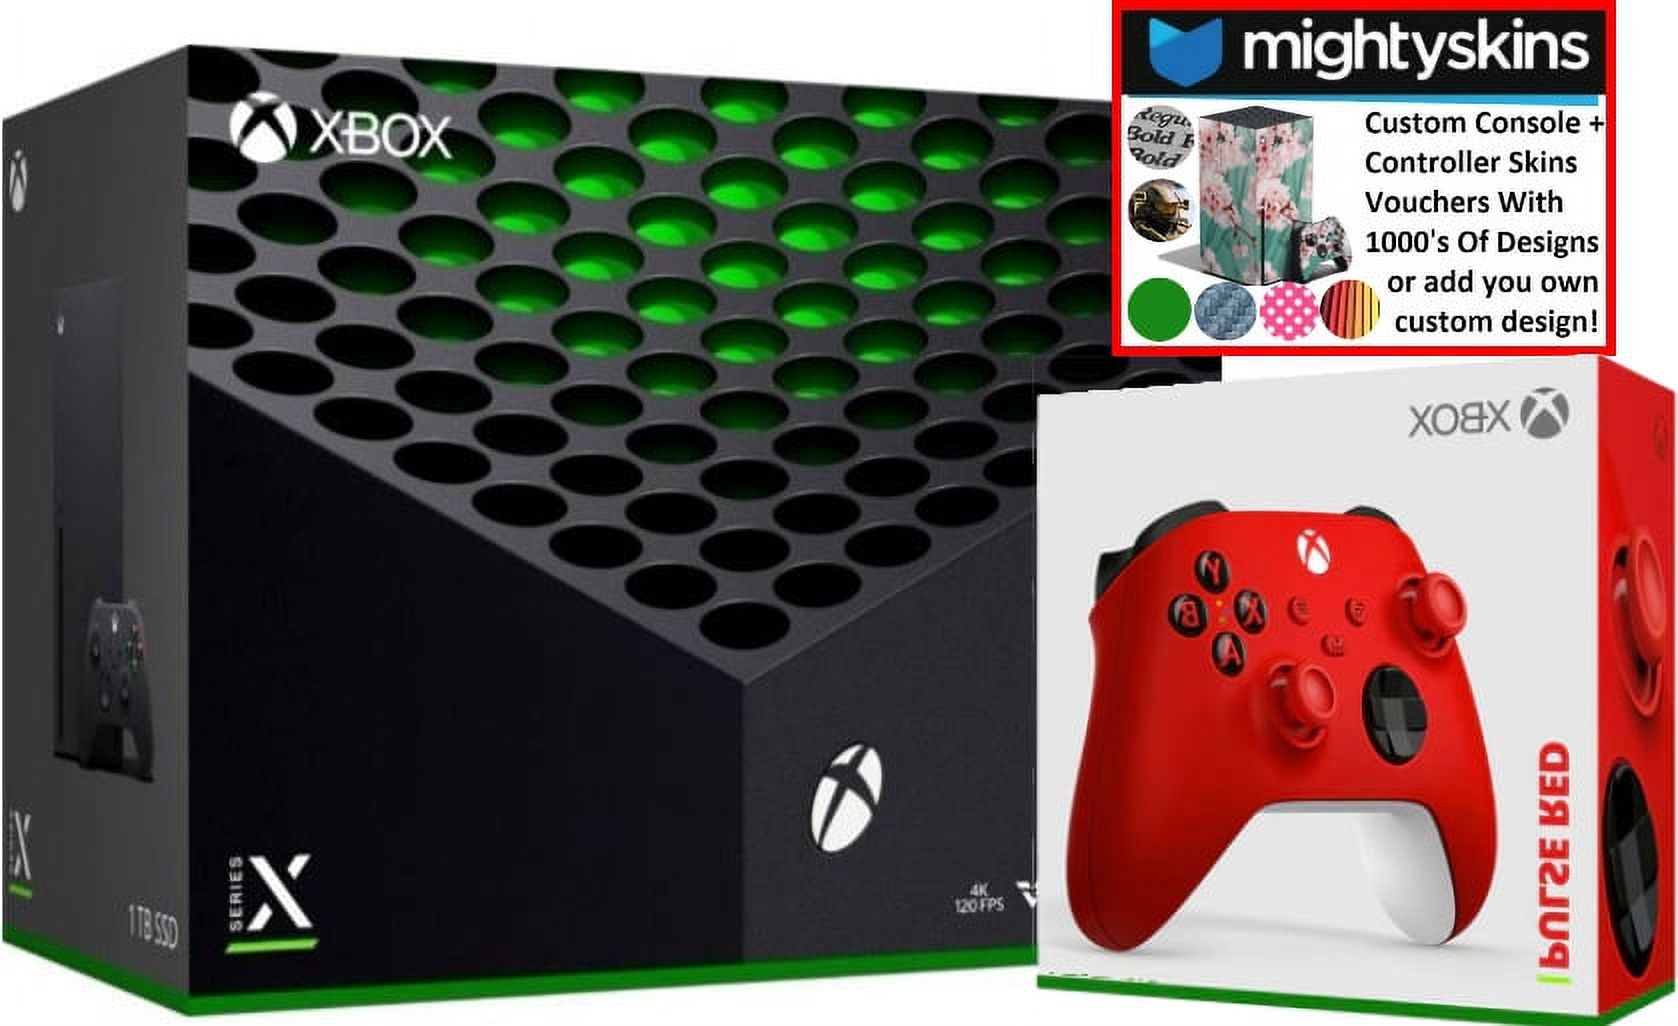 Xbox Series X Video Game Console Black w/ Extra Controller and Mightyskins  Voucher - Pulse Red